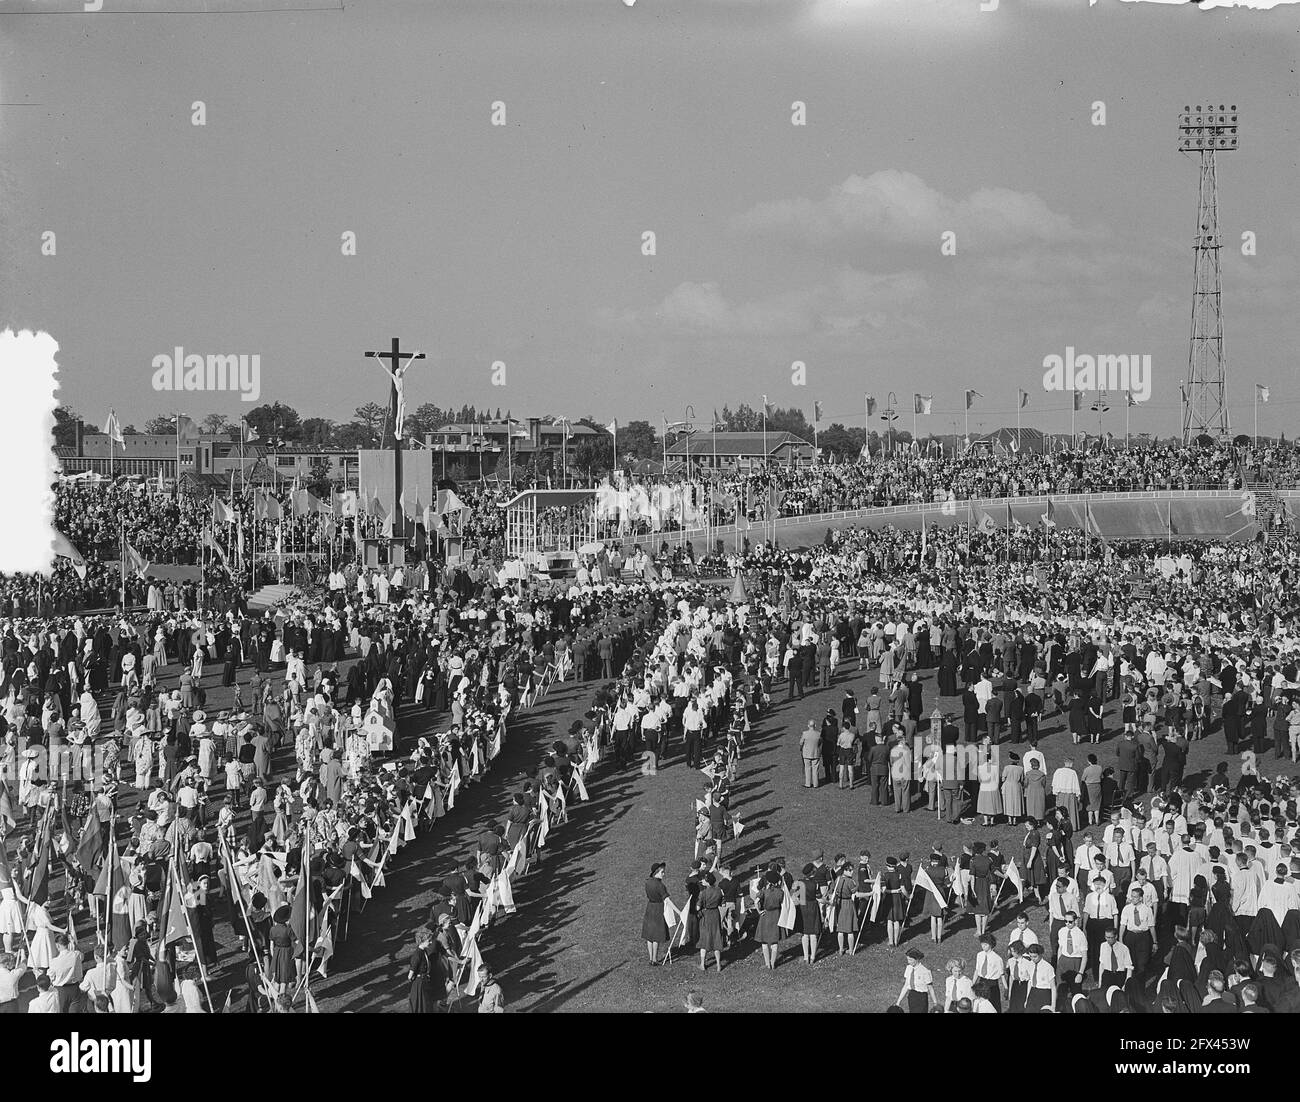 100 years of Kromstaf. Stadion De Galgewaard. Overview, 15 May 1953, The Netherlands, 20th century press agency photo, news to remember, documentary, historic photography 1945-1990, visual stories, human history of the Twentieth Century, capturing moments in time Stock Photo